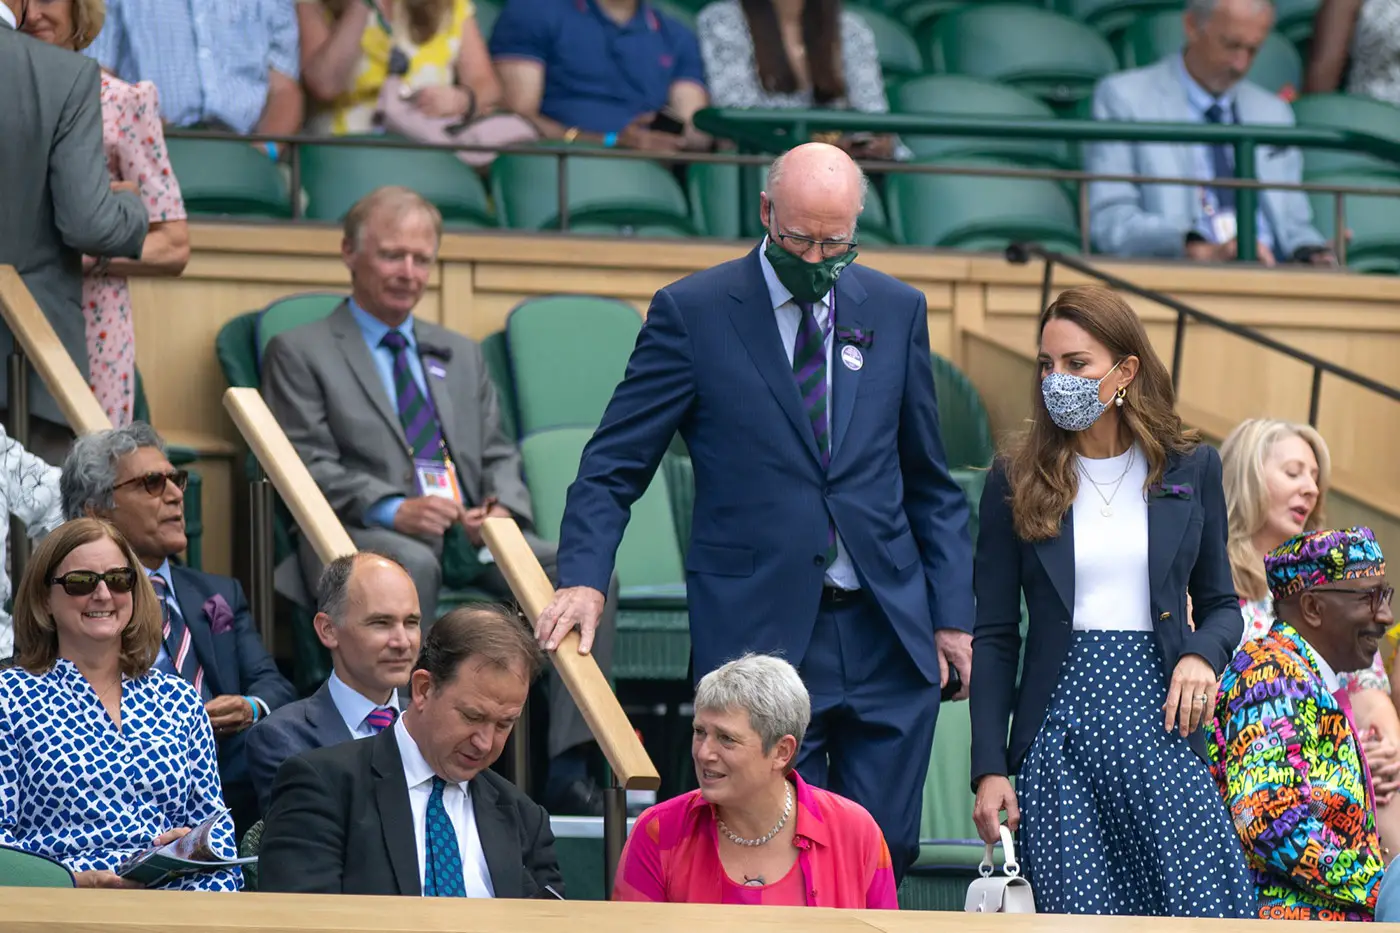 the Duchess of Cambridge joined The Duke of Kent, President of the AELTC,  in the Royal box.